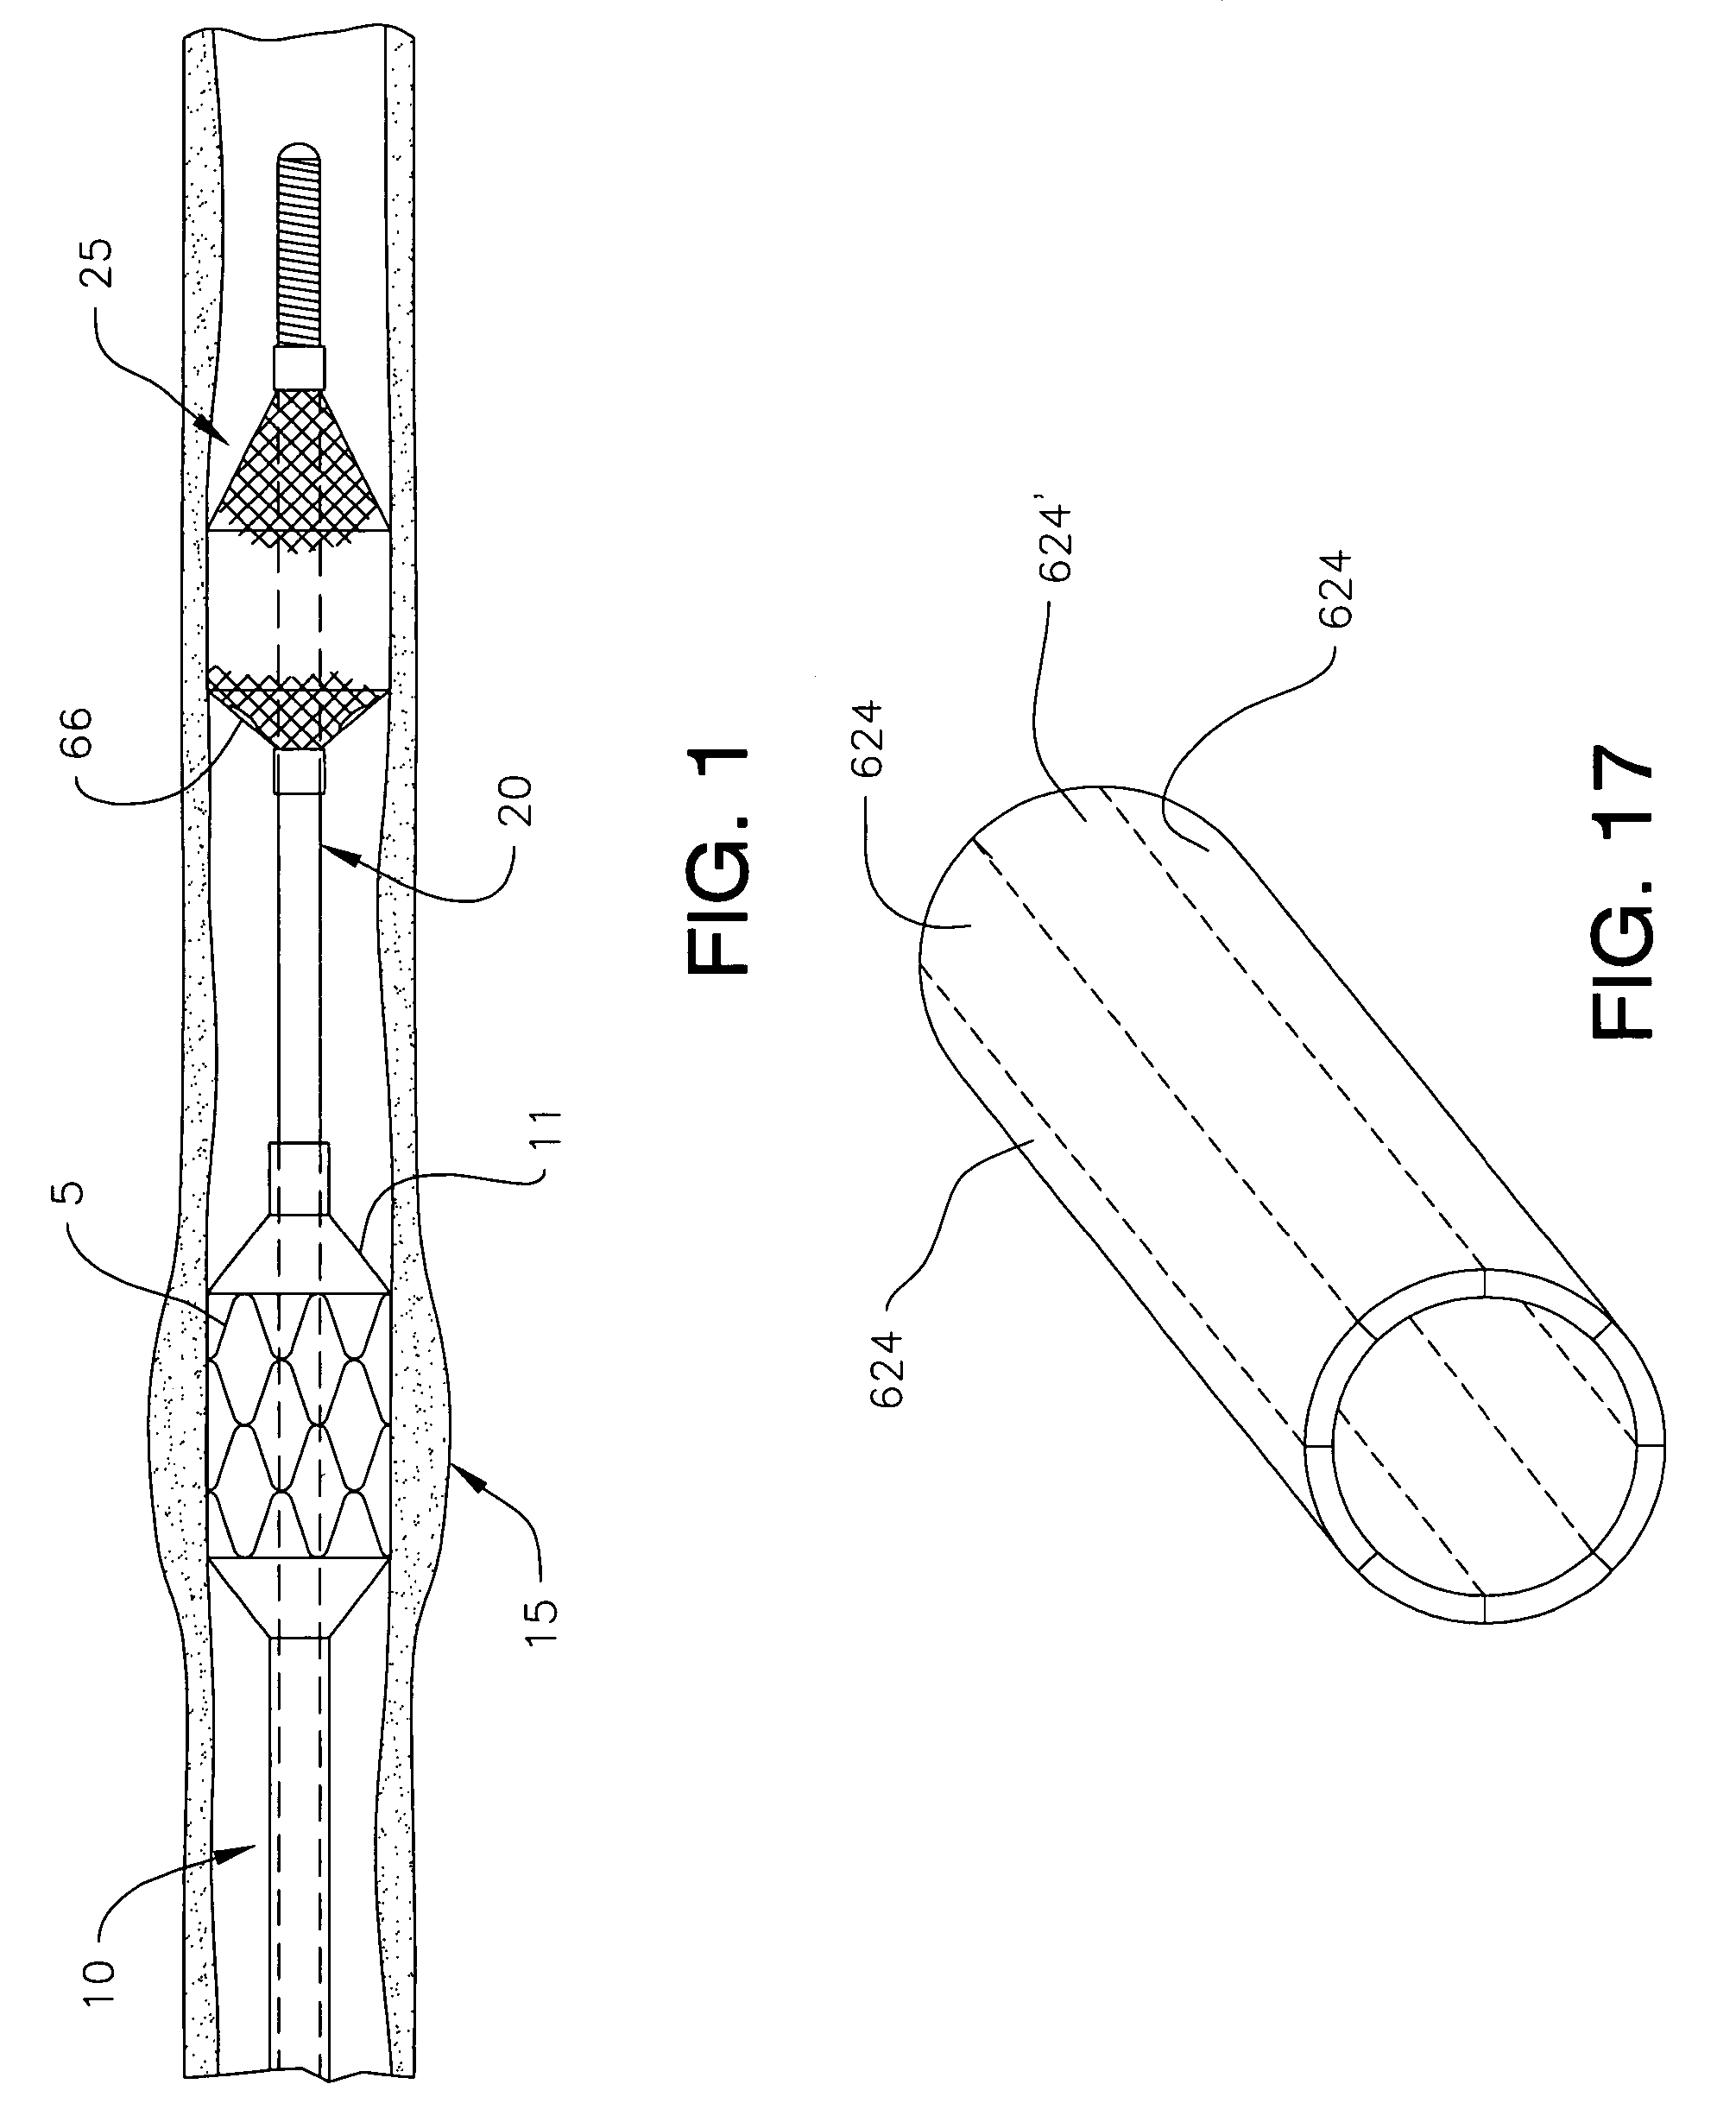 Steerable distal protection guidewire and methods of use